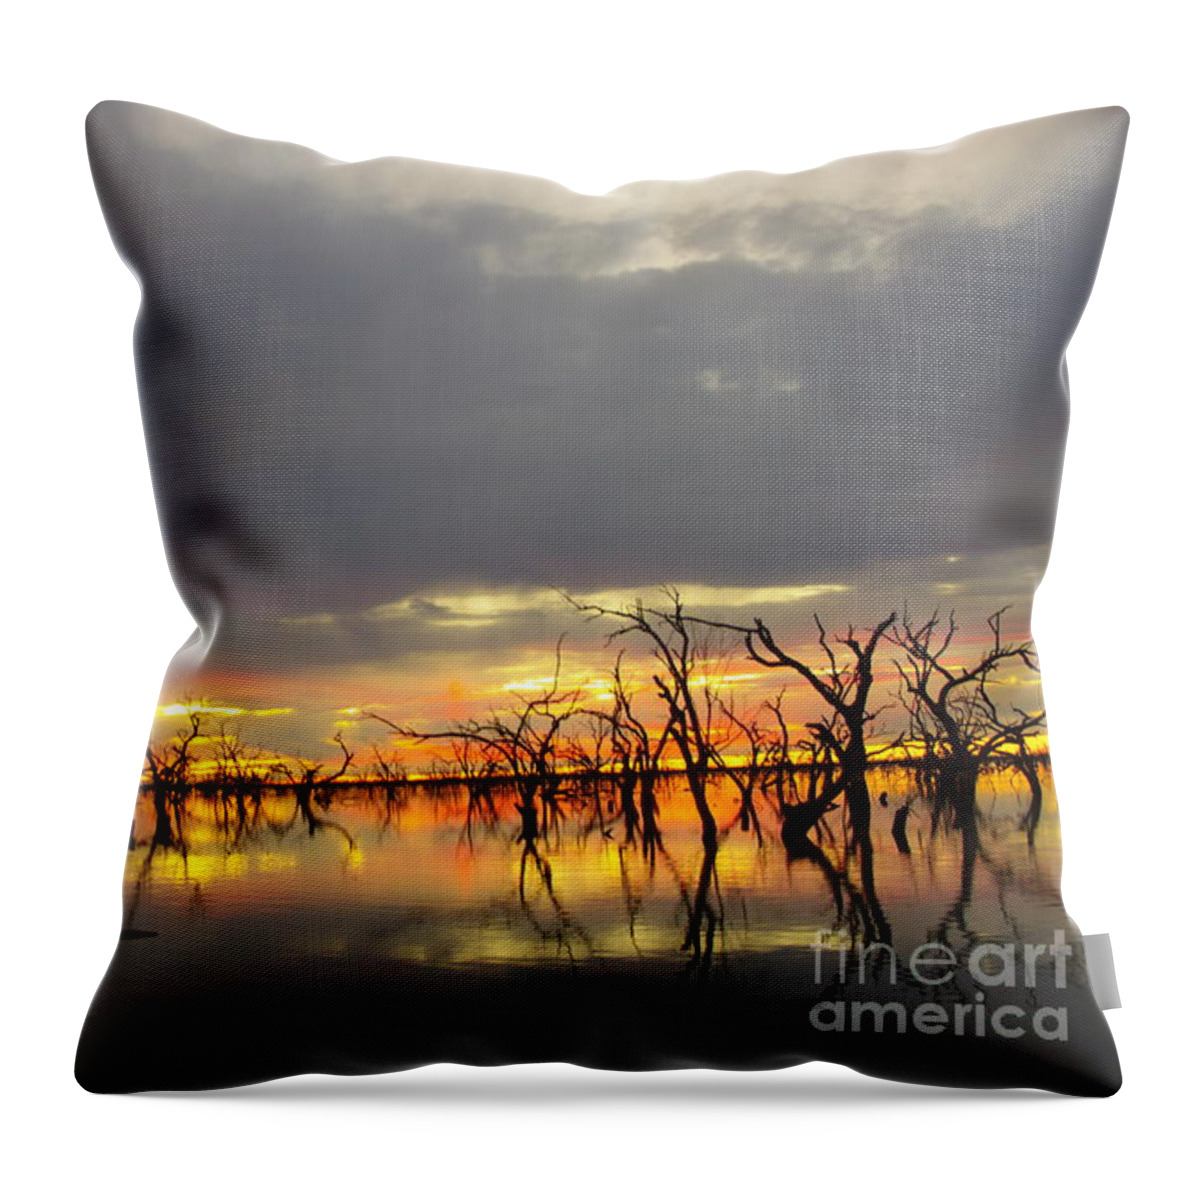 Outback Sunset Throw Pillow featuring the photograph Outback Sunset by Blair Stuart